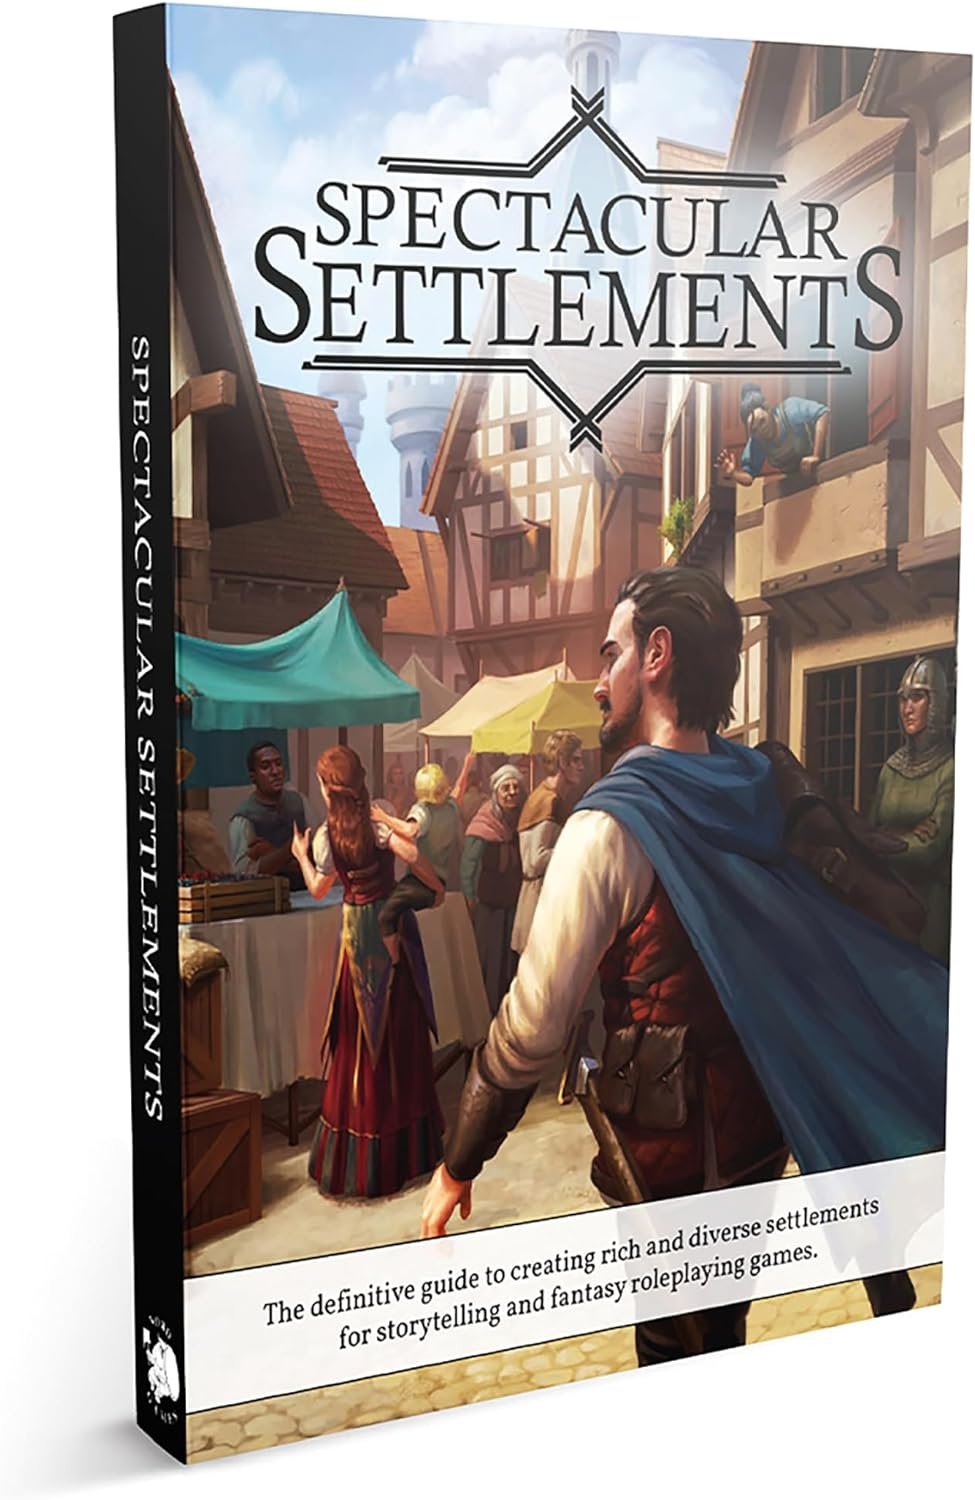 Nord Games: Spectacular Settlements - Hardcover RPG Supplement Book, Build Locations & Utilize Pregenerated Settlements, 5e D&D Roleplaying, 457 Pages